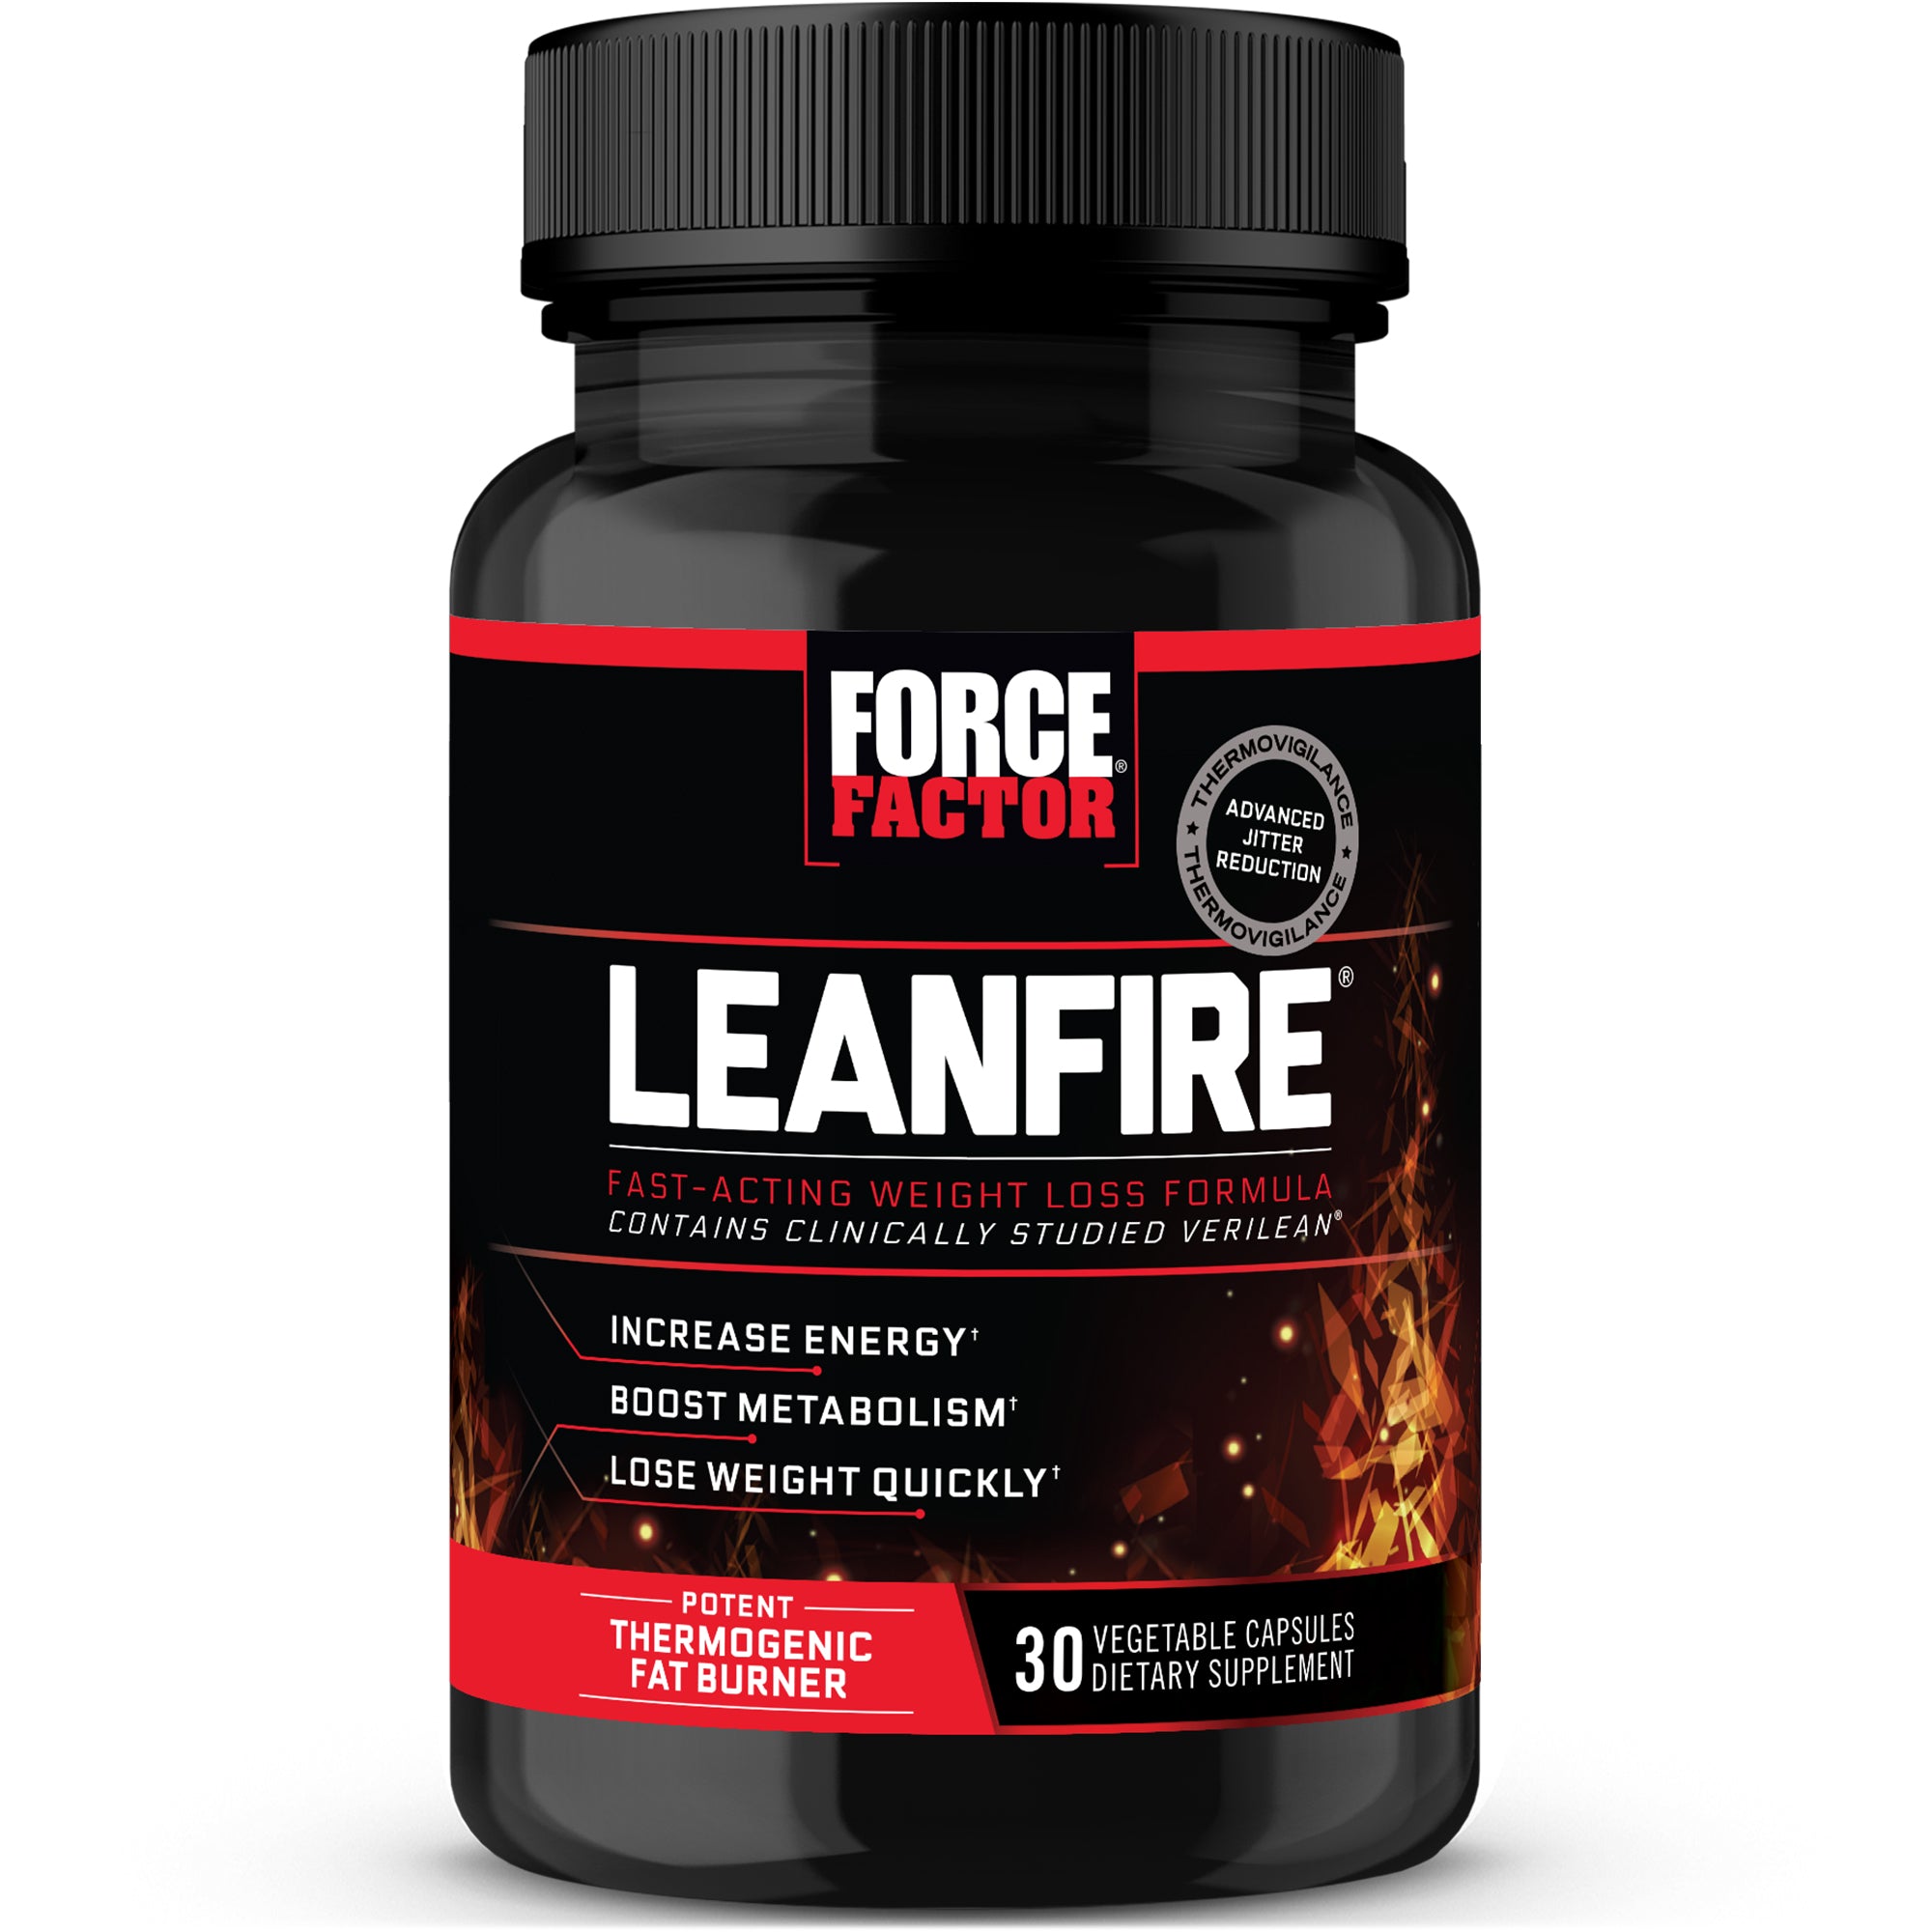 Fast-acting thermogenic formula